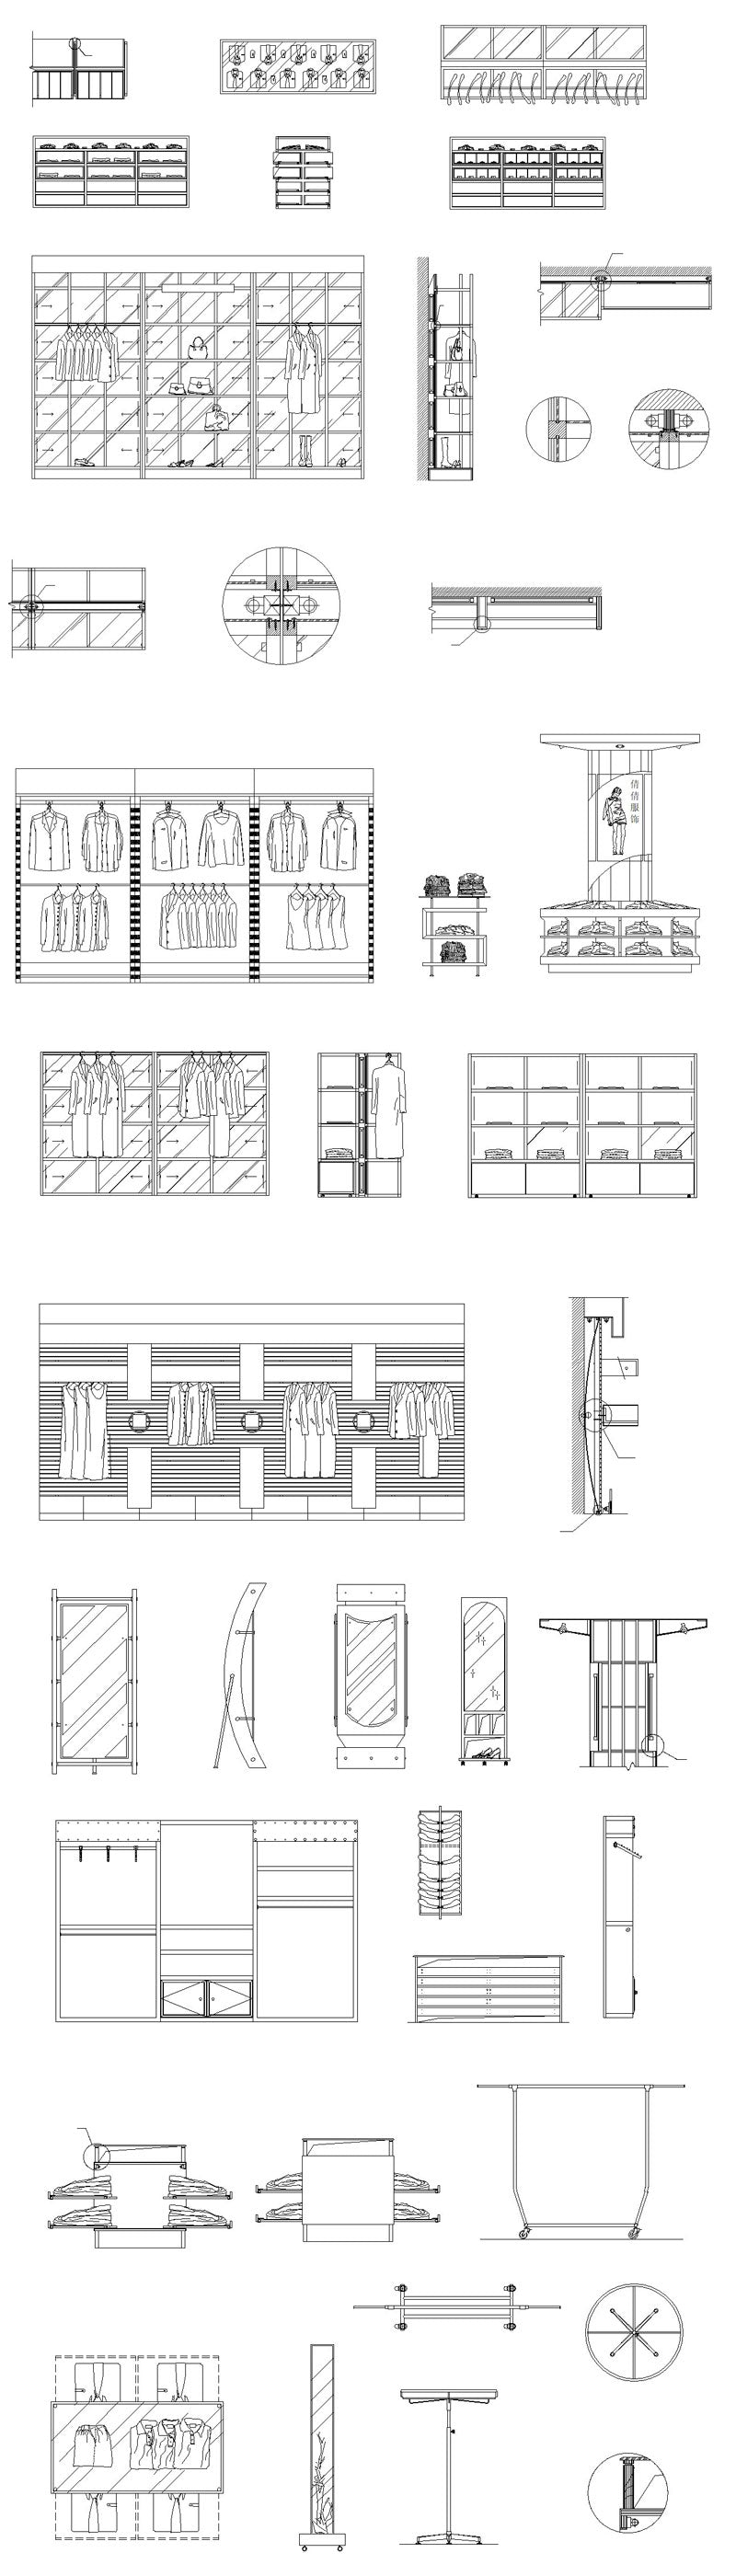 ★【Store CAD Design ,Blocks,Details Elevation Collection】@Shopping centers, department stores, boutiques, clothing stores, women's wear, men's wear, store design-Autocad Blocks,Drawings,CAD Details,Elevation